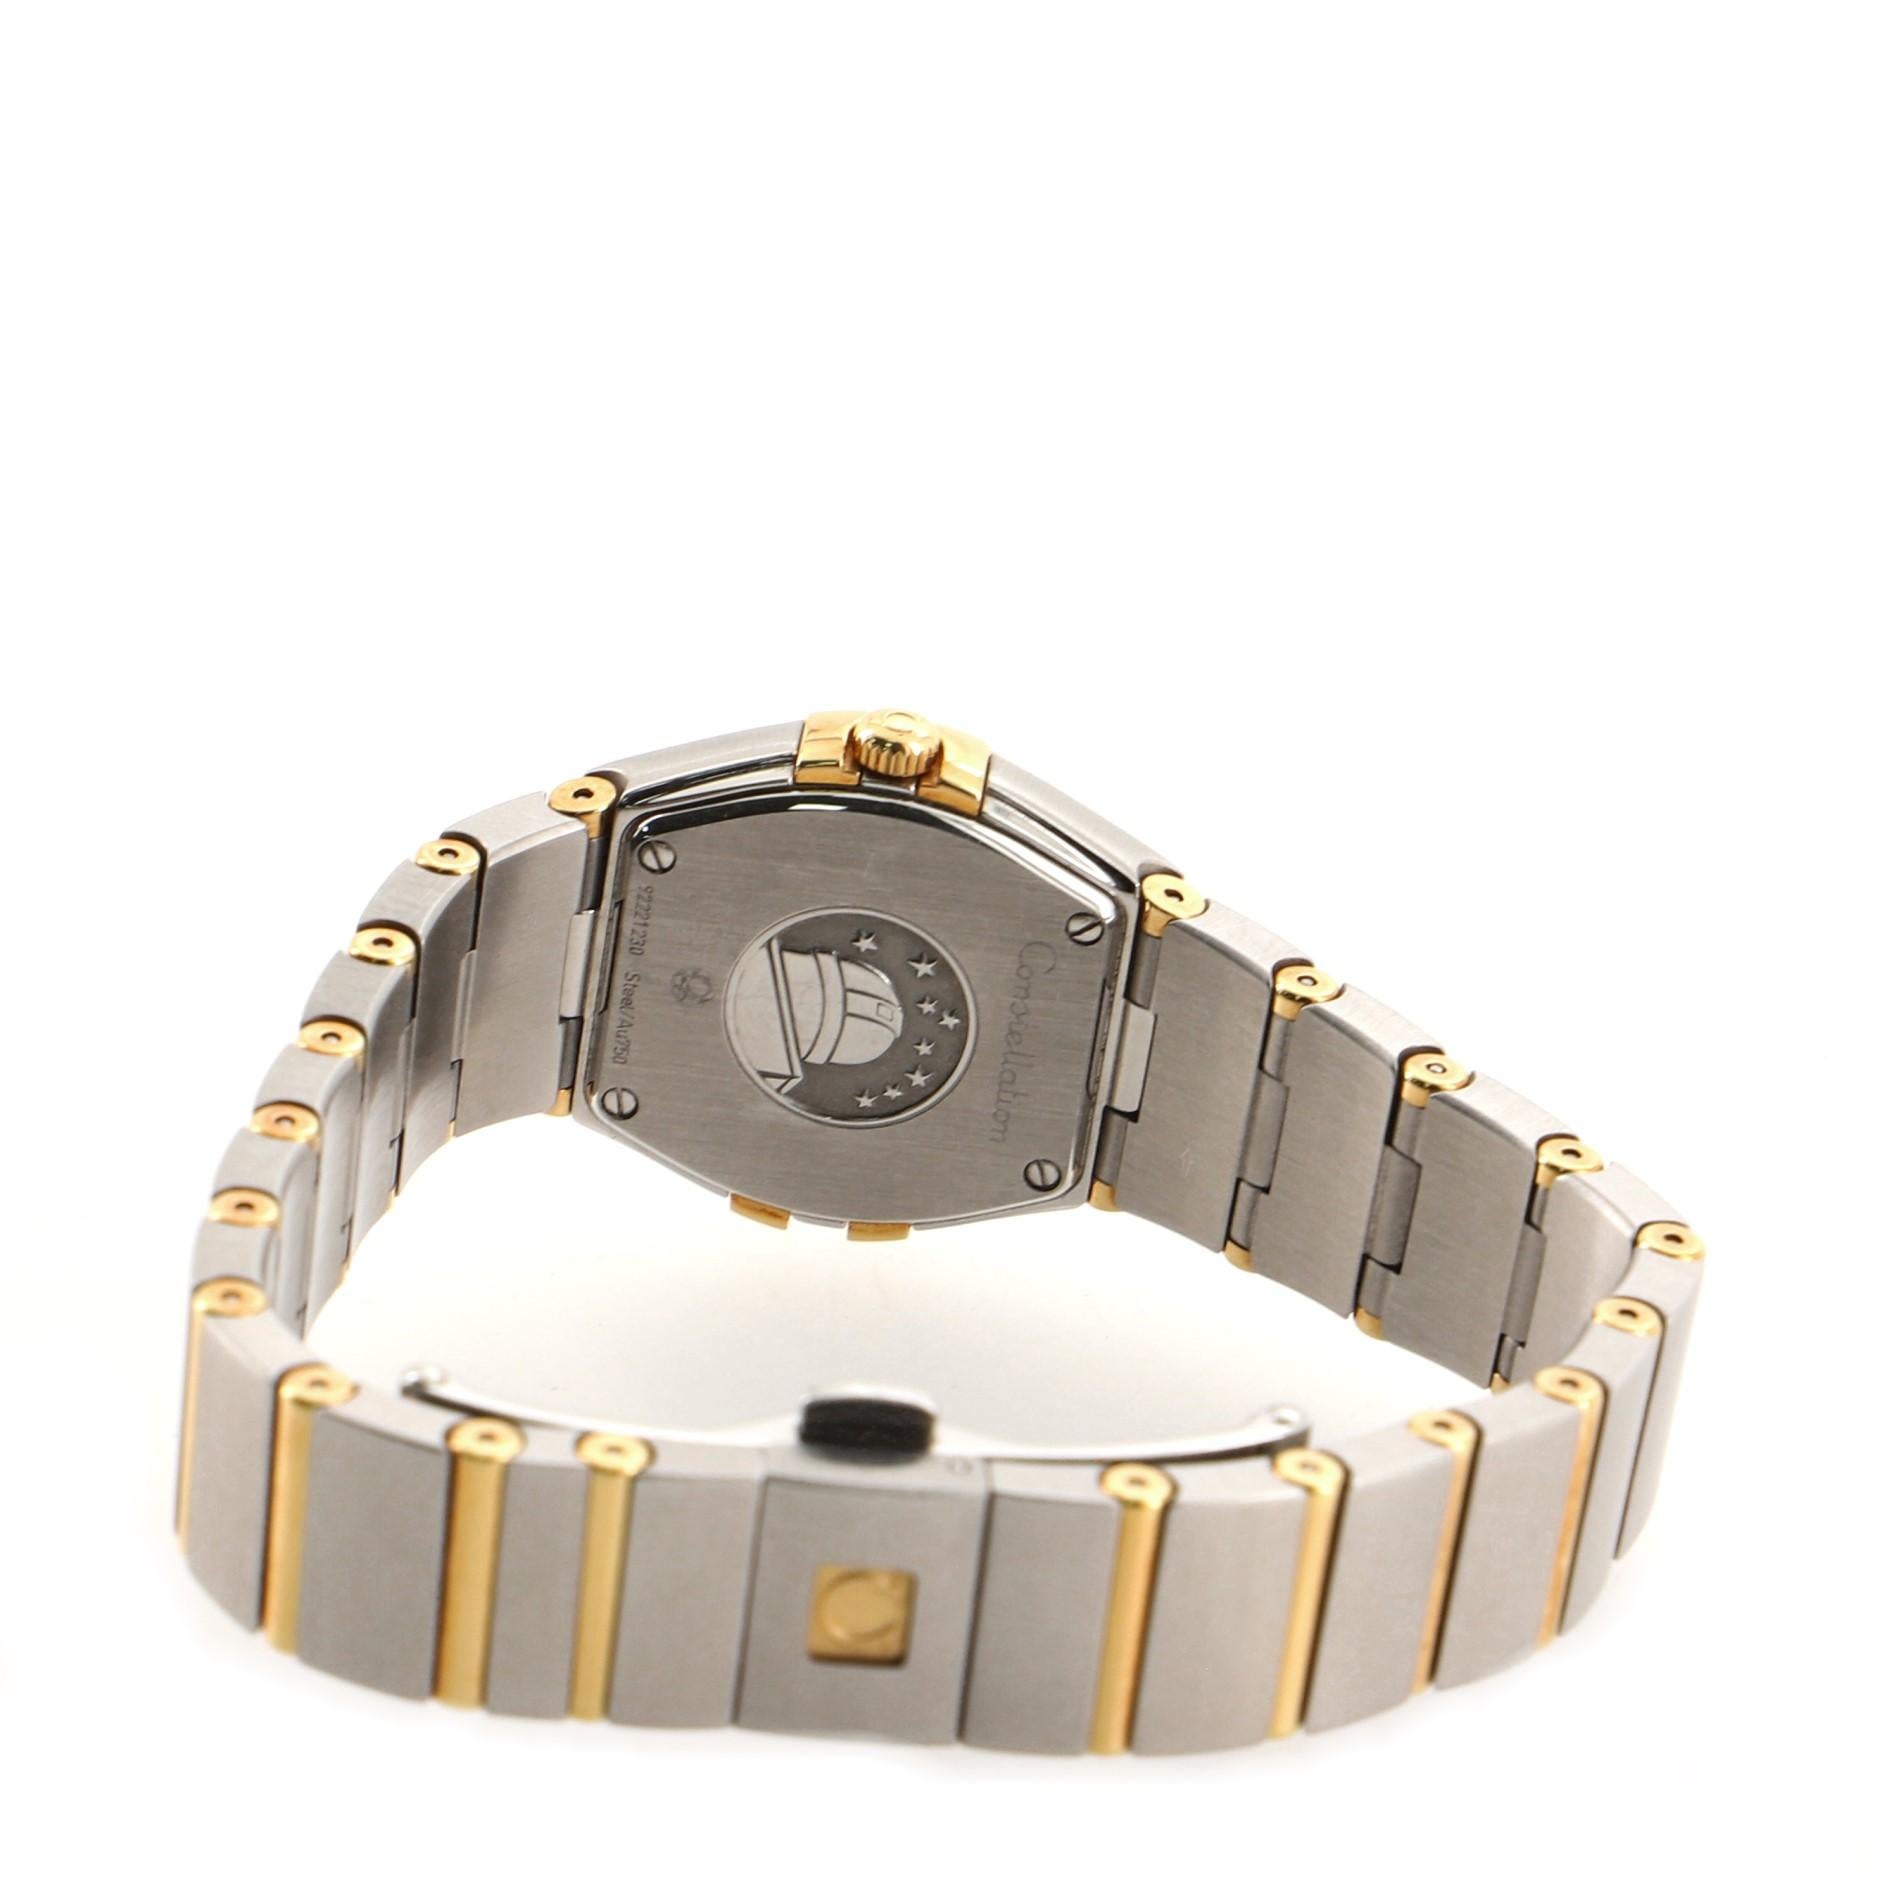 Women's or Men's Omega Constellation Orbis Star Quartz Watch Stainless Steel and Yellow Gold